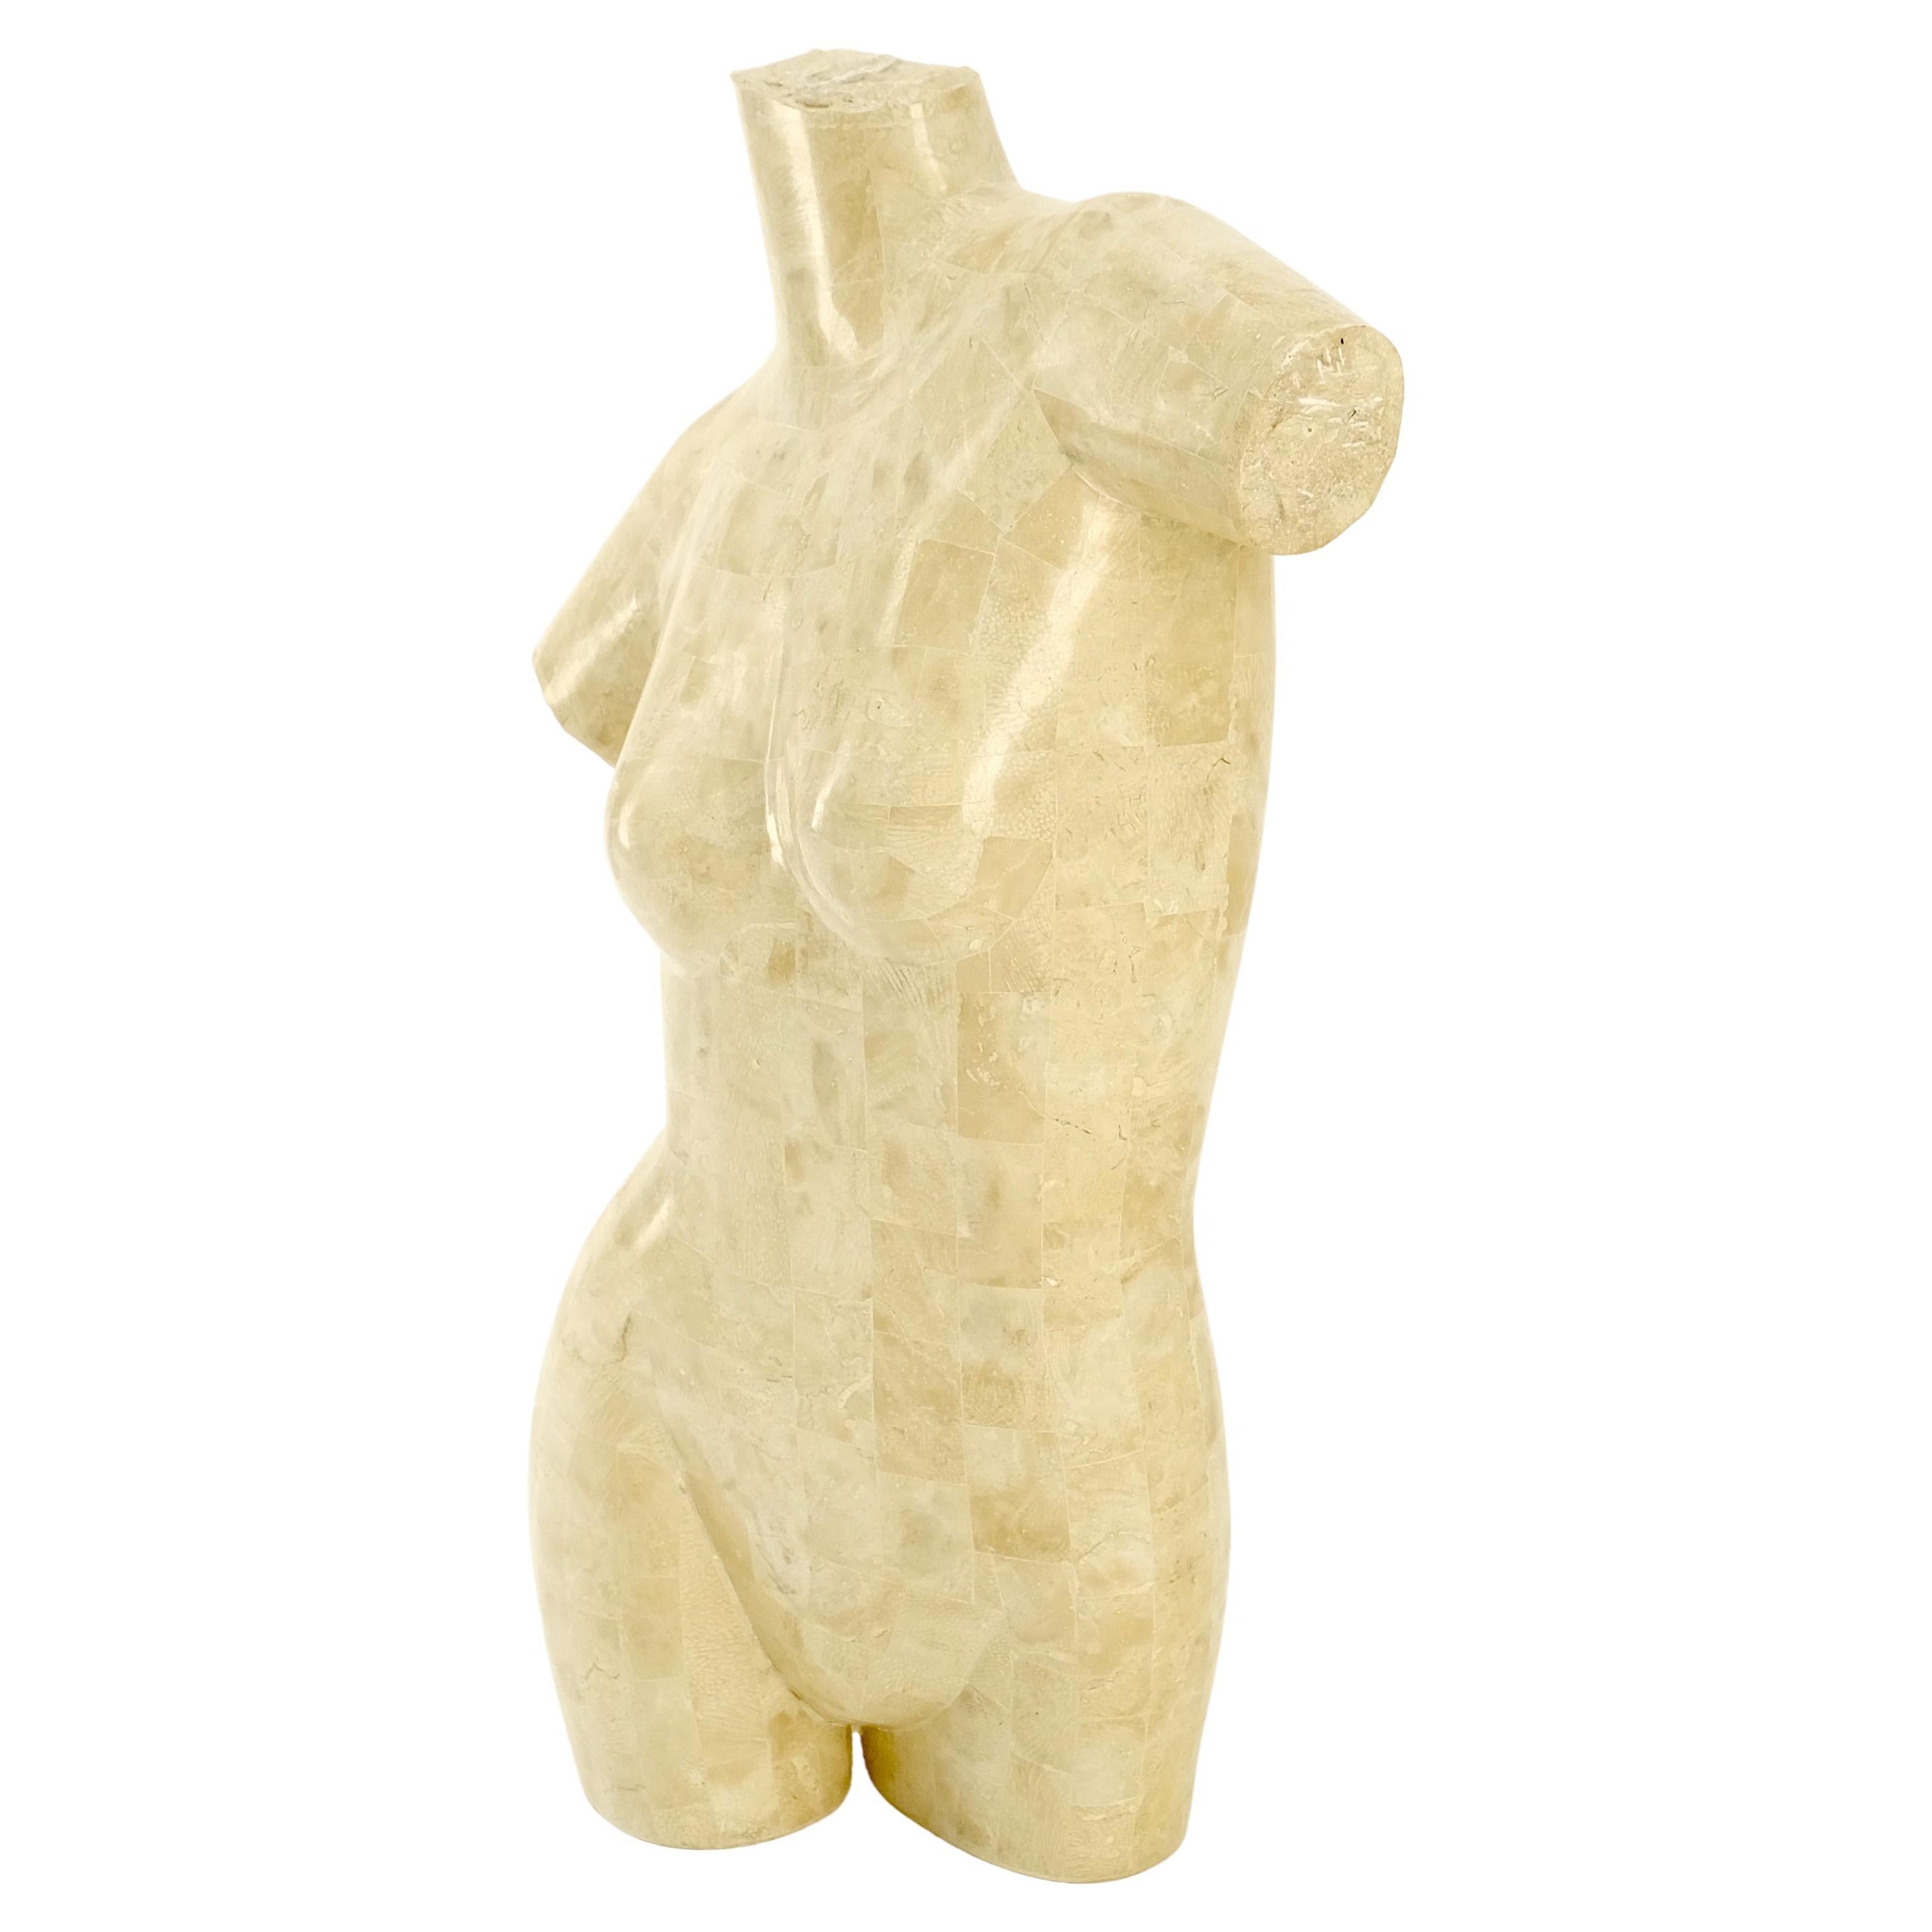 Tessellated Stone Marble Travertine Sculpture of Nude Female Torso Mint! For Sale 1